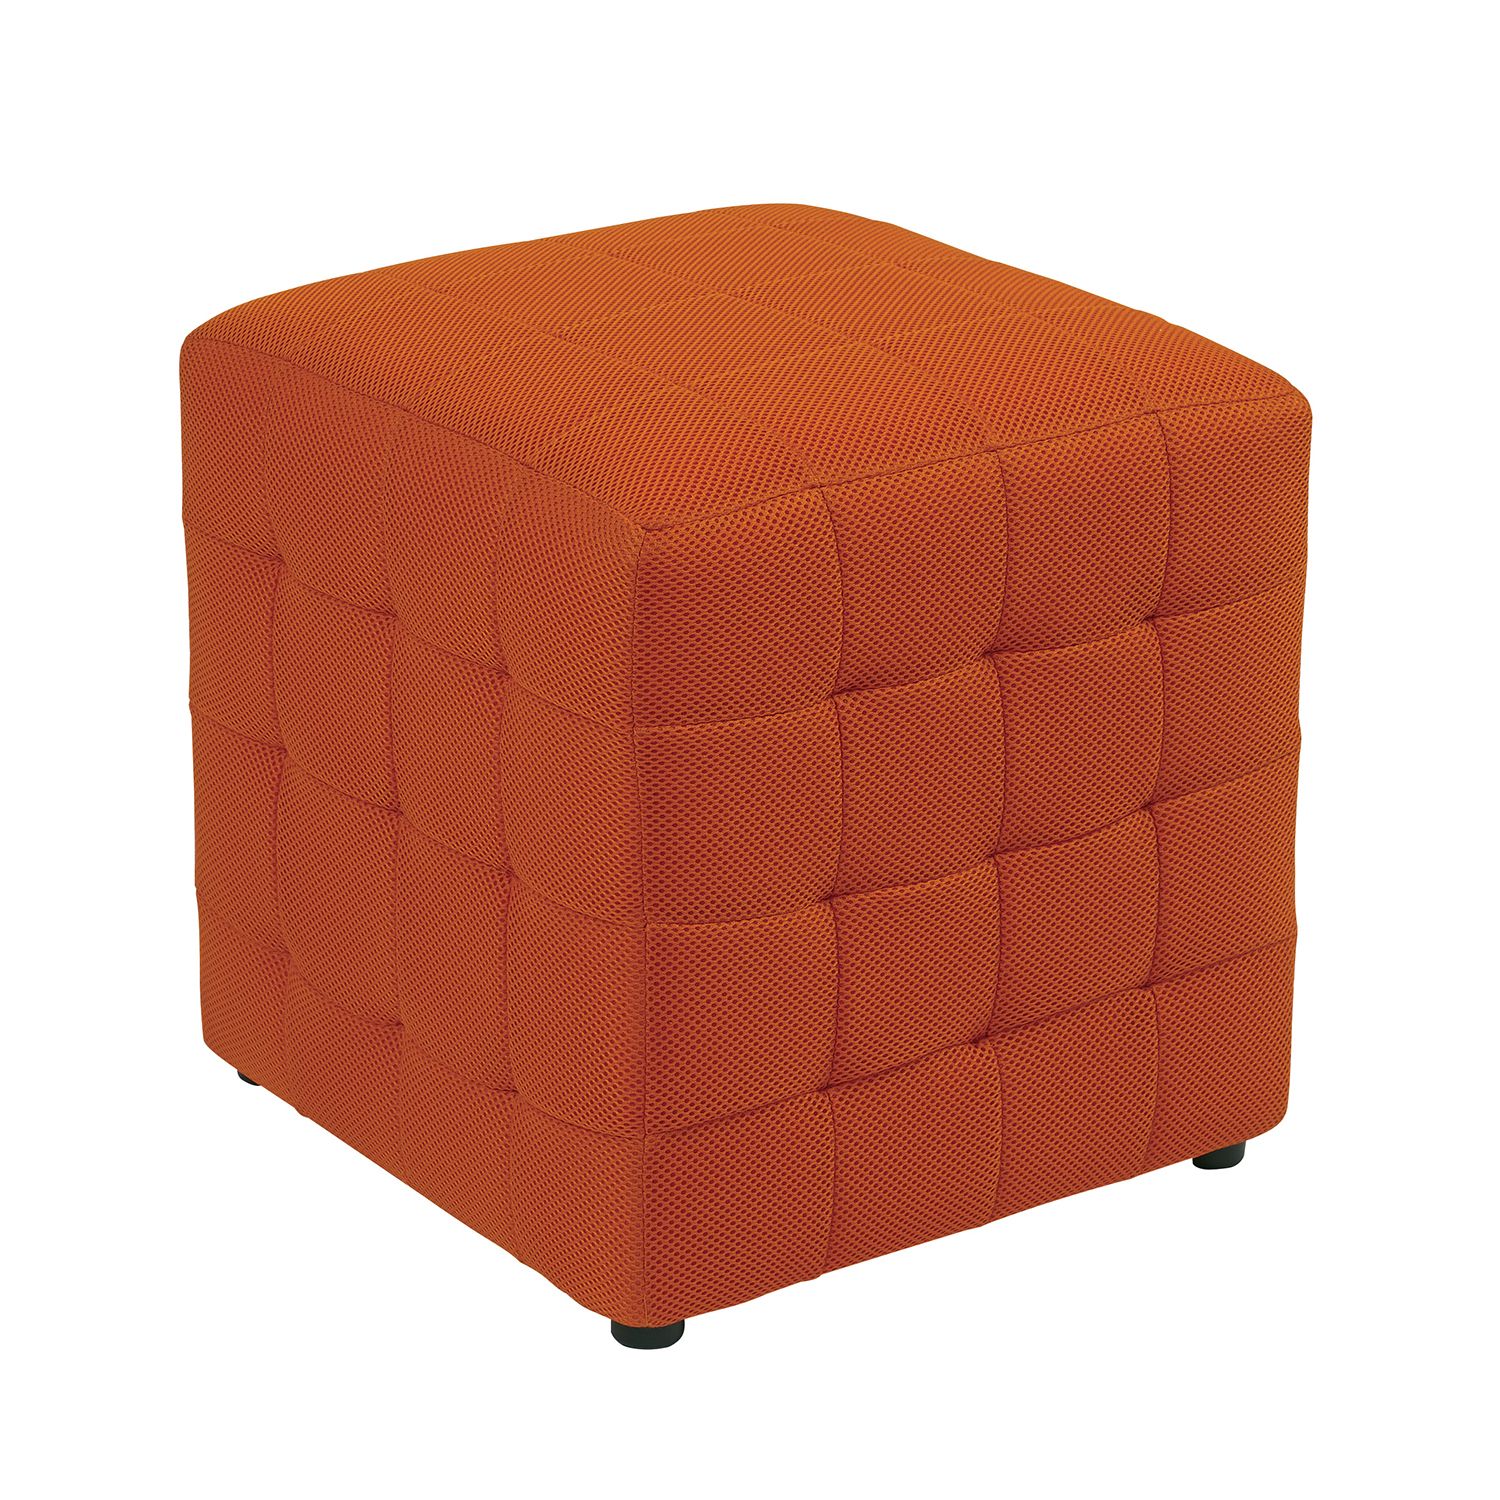 15" Cube Ottoman – Pier1 Pertaining To Solid Cuboid Pouf Ottomans (View 5 of 20)